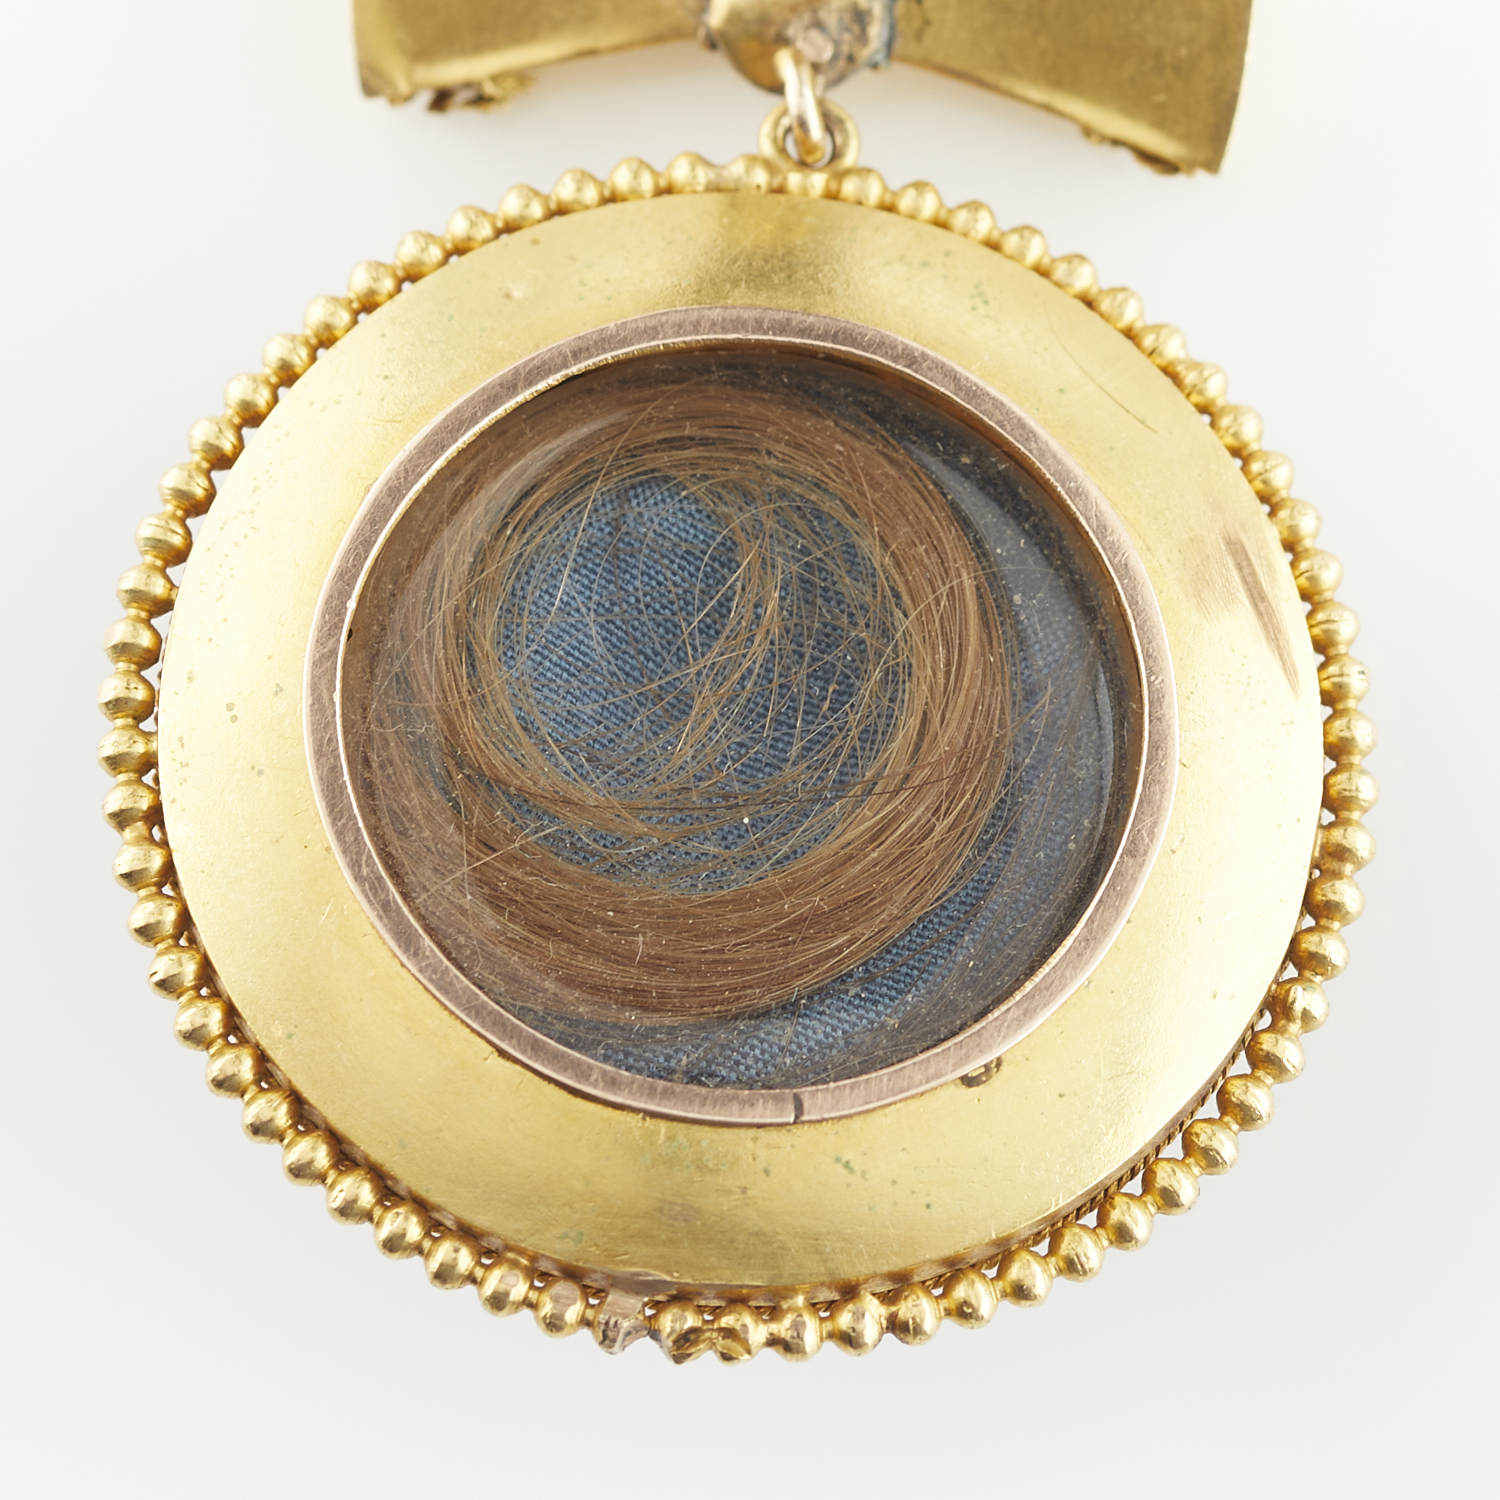 Etruscan Revival Gold & Turquoise Pendant - Image 8 of 8